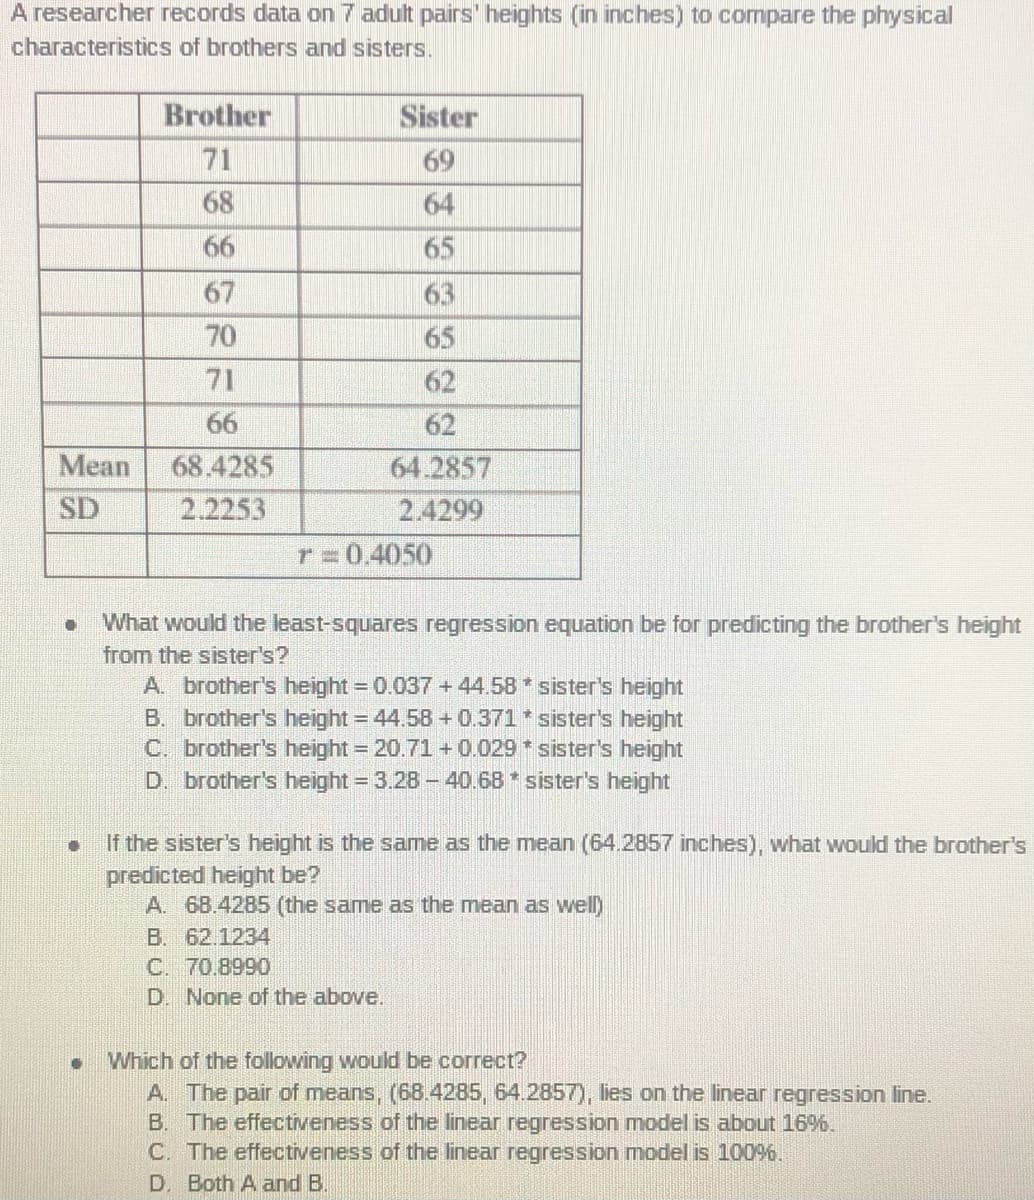 A researcher records data on 7 adult pairs' heights (in inches) to compare the physical
characteristics of brothers and sisters.
Brother
Sister
71
69
68
64
6
65
67
63
70
65
71
62
66
62
Mean
68.4285
64.2857
SD
2.2253
2.4299
r=0.4050
What would the least-squares regression equation be for predicting the brother's height
from the sister's?
A. brother's height = 0.037+44.58 * sister's height
B. brother's height = 44.58 + 0.371* sister's height
C. brother's height = 20.71 + 0.029 * sister's height
D. brother's height = 3.28- 40.68 * sister's height
If the sister's height is the same as the mean (64.2857 inches), what would the brother's
predicted height be
A. 68.4285 (the same as the mean as well)
B. 62.1234
C. 70.8990
D. None of the above.
Which of the following would be correct?
A. The pair of means, (68.4285, 64.2857), lies on the linear regression line.
B. The effectiveness of the linear regression model is about 16%,
C. The effectiveness of the linear regression model is 10096.
D. Both A and B.
